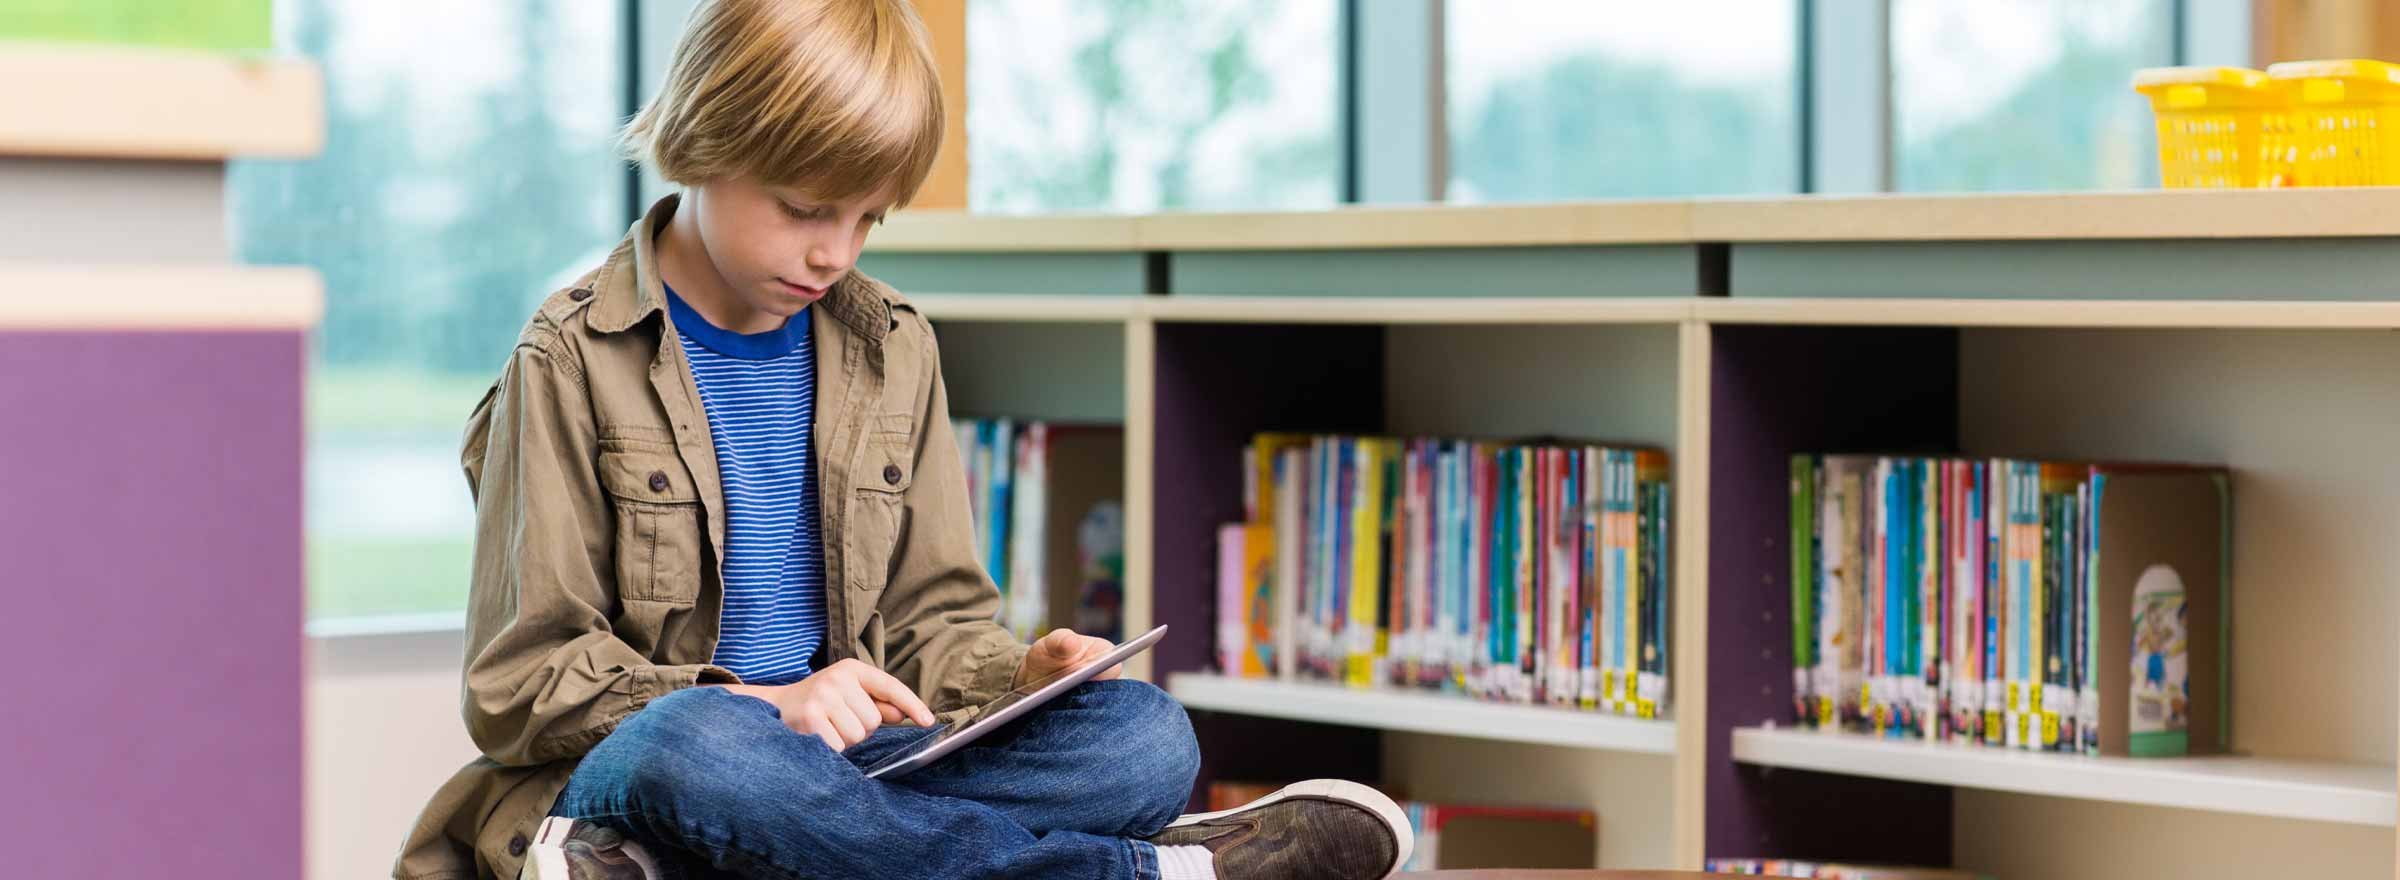 boy sitting on the floor in a library using a tablet